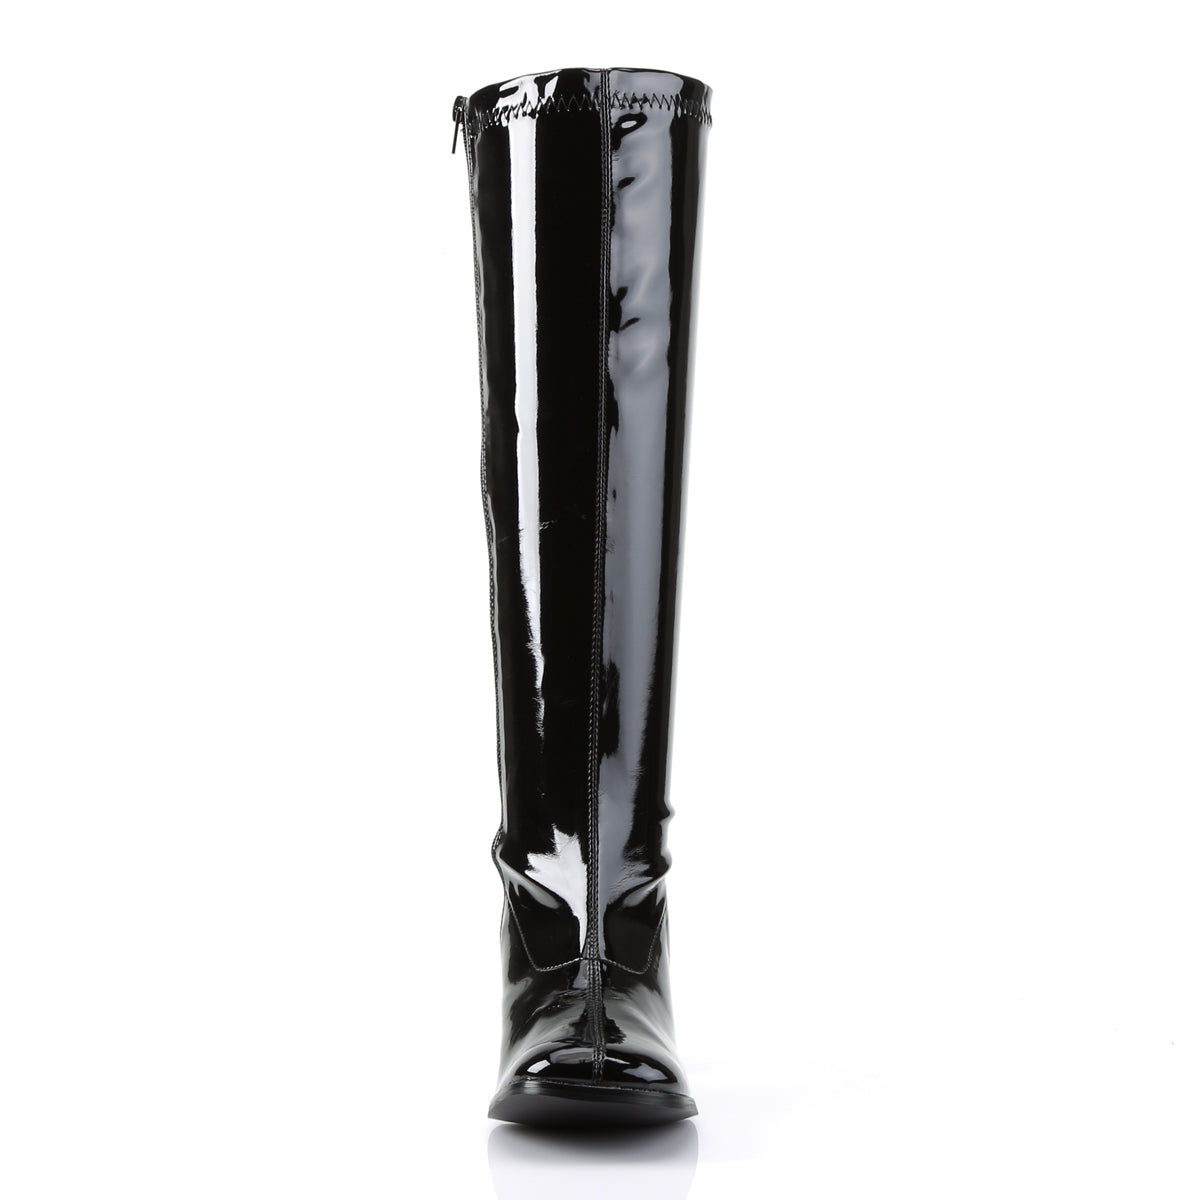 GOGO-300WC Knee High Boots